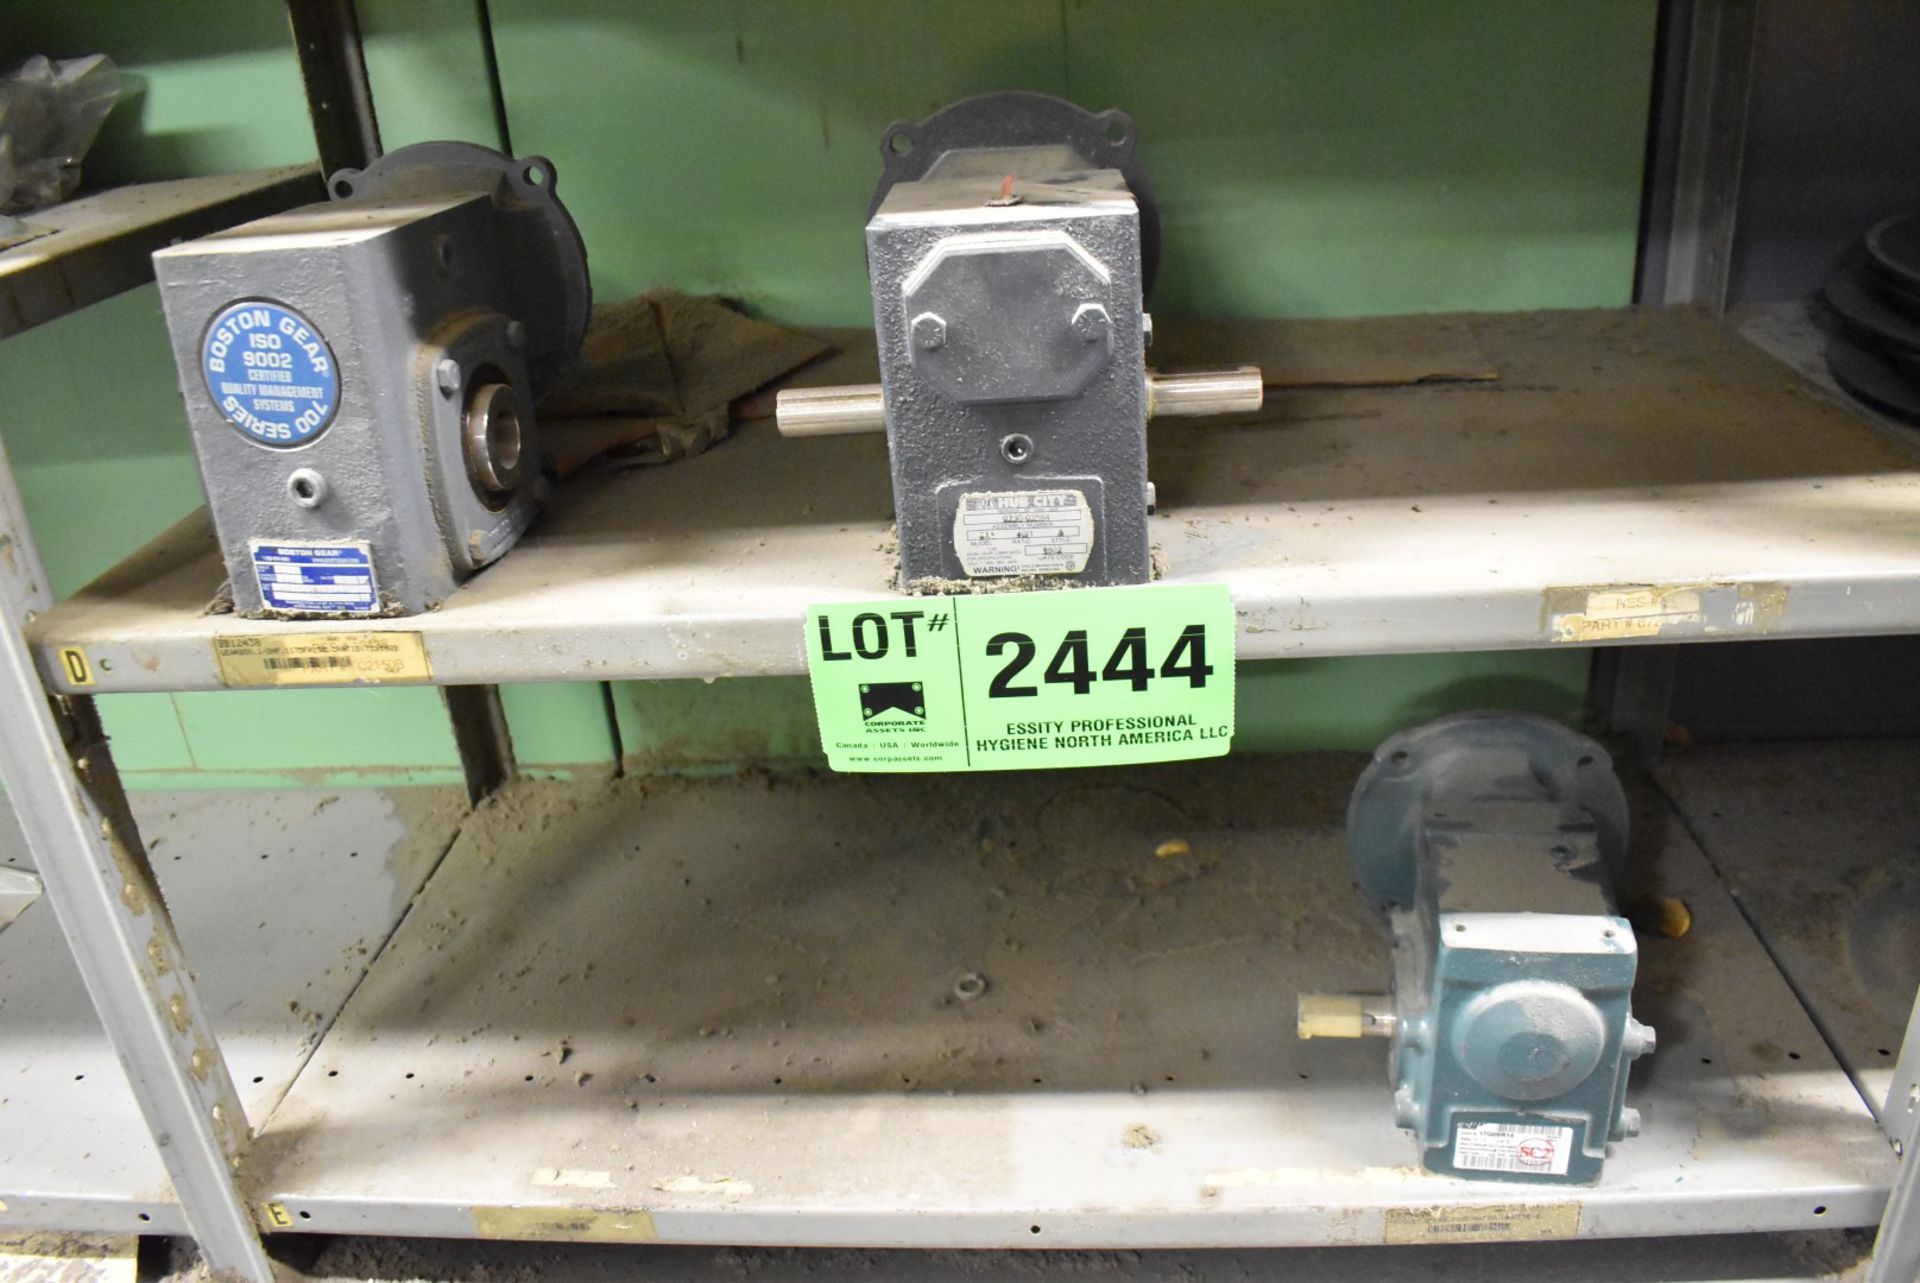 LOT/ CONTENTS OF (2) SHELVES - SPARE GEARBOXES [RIGGING FEES FOR LOT #2444 - $TBD USD PLUS